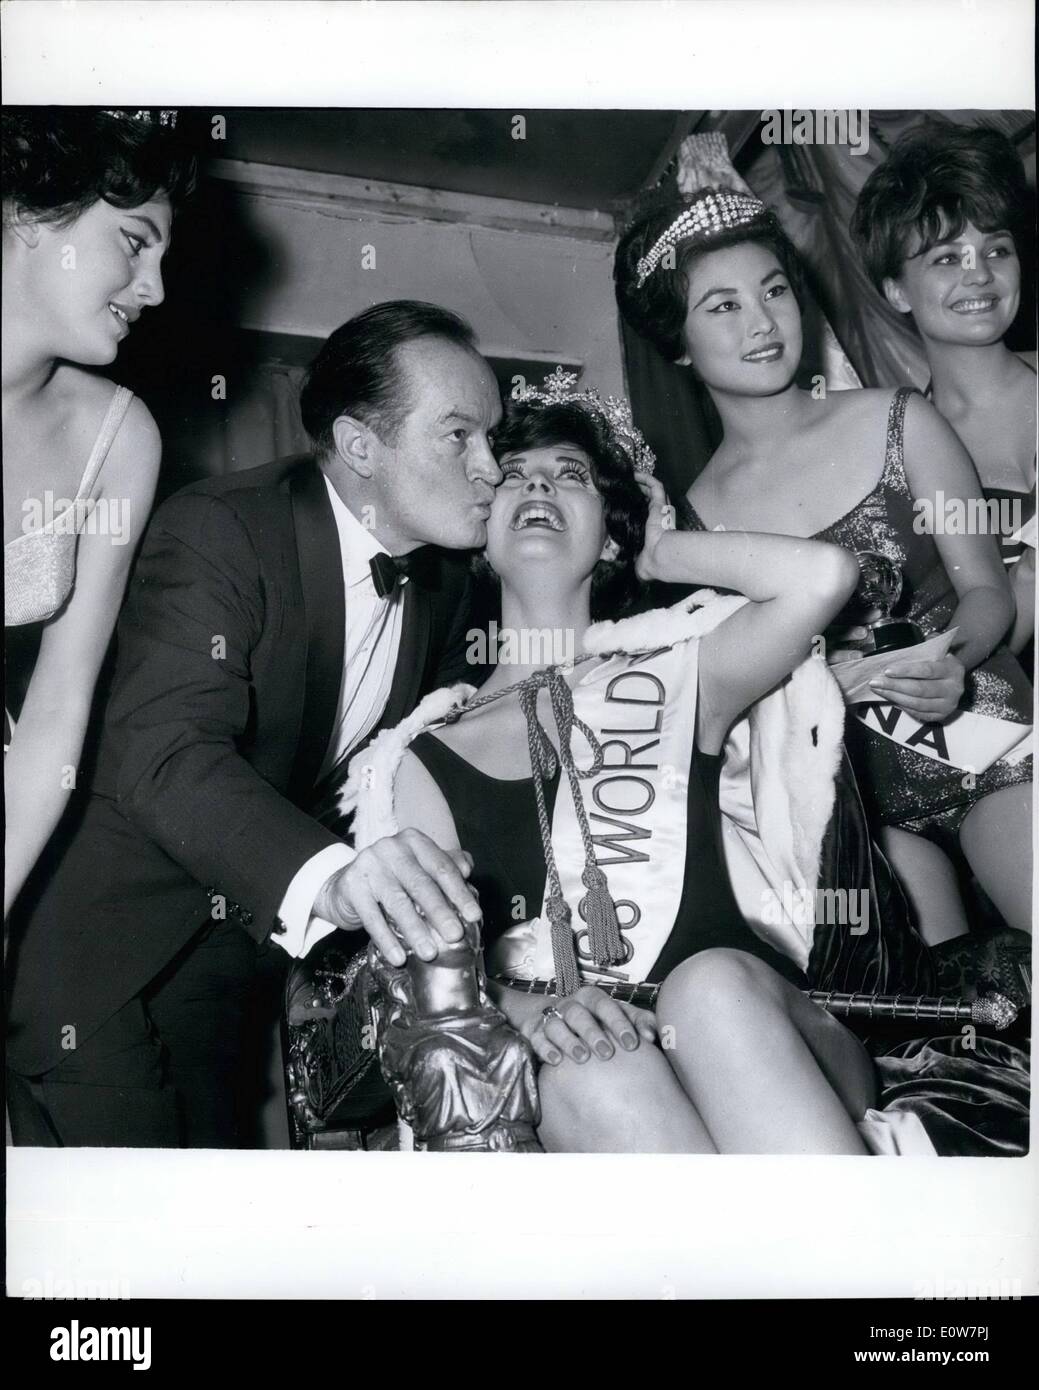 Nov. 10, 1961 - 10-11-61 Miss United Kingdom becomes Miss World 1961 . Congratulations from Bob Hope. Lovely eighteen year old Miss Rosemarie Frankland from Lancaster last night won the title of Miss World 1961 at the Kyceum Ballroom in the Strand. Runner-up was nineteen year old Miss Free China (Grace Li. 19). Third was 18 year old Carmen Cervera (Miss Spain). Keystone Photo Shows: Bob Hope has a congratulatory kiss for Miss World 1961 Rosemarie Frankland after her great victory last night. On left is Miss Spain who came third. Miss Free China who took second place is right Stock Photo